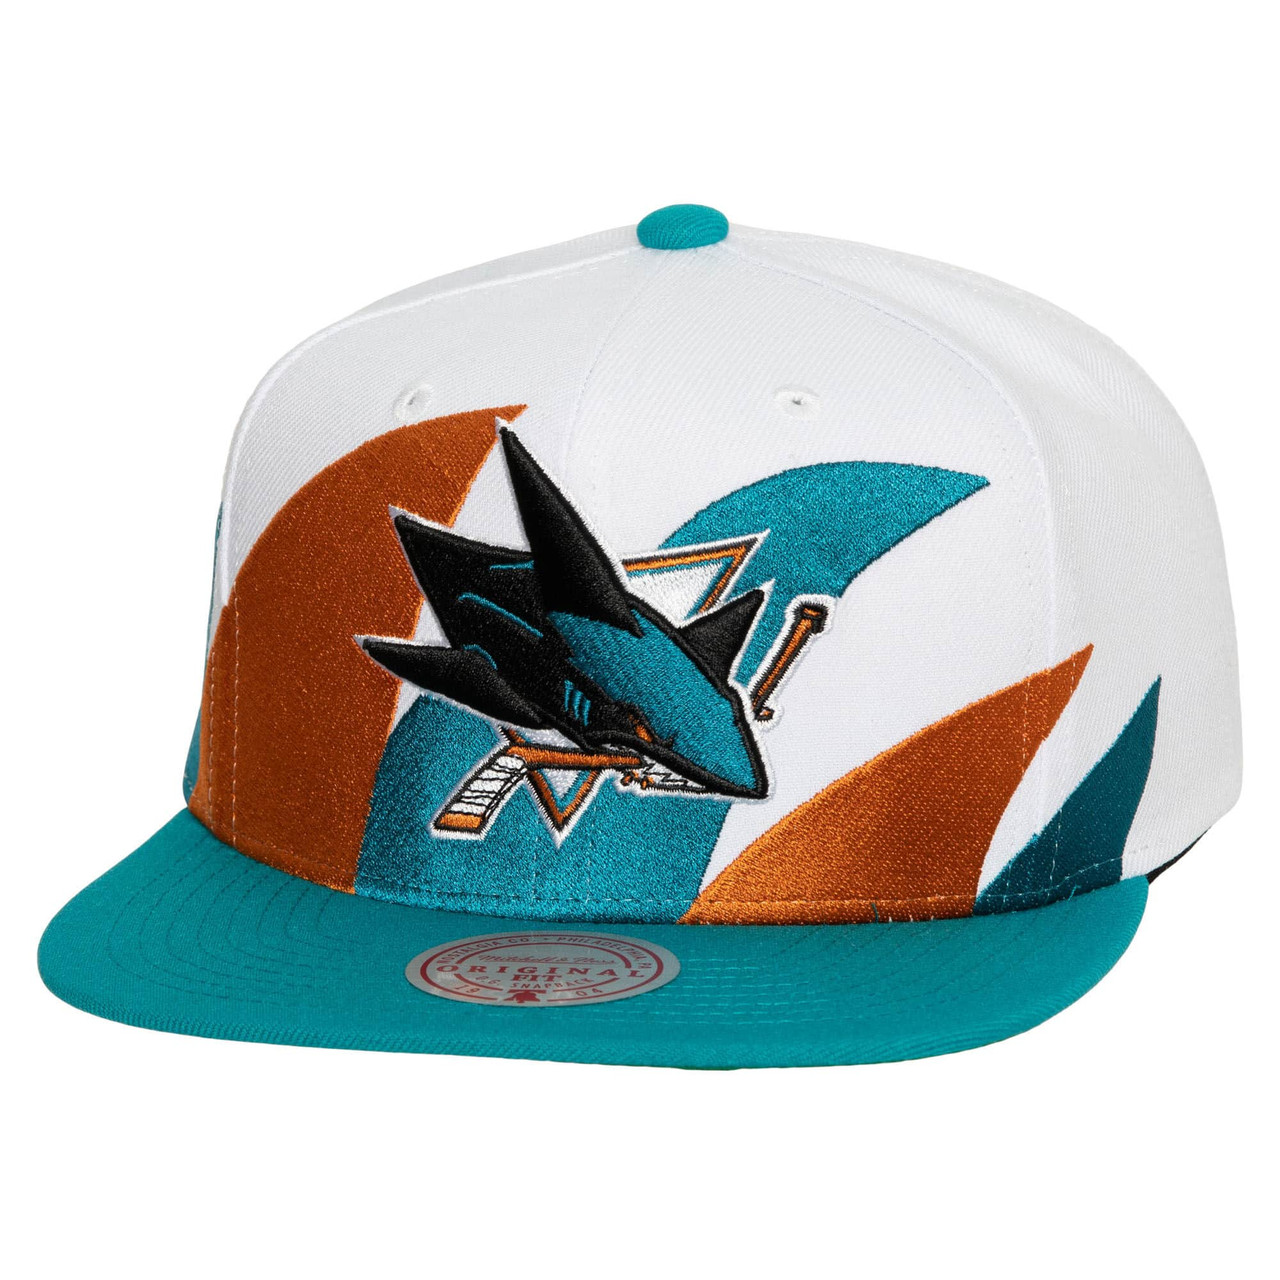 San Jose Sharks Mitchell & Ness Vintage Fitted Hat - Teal